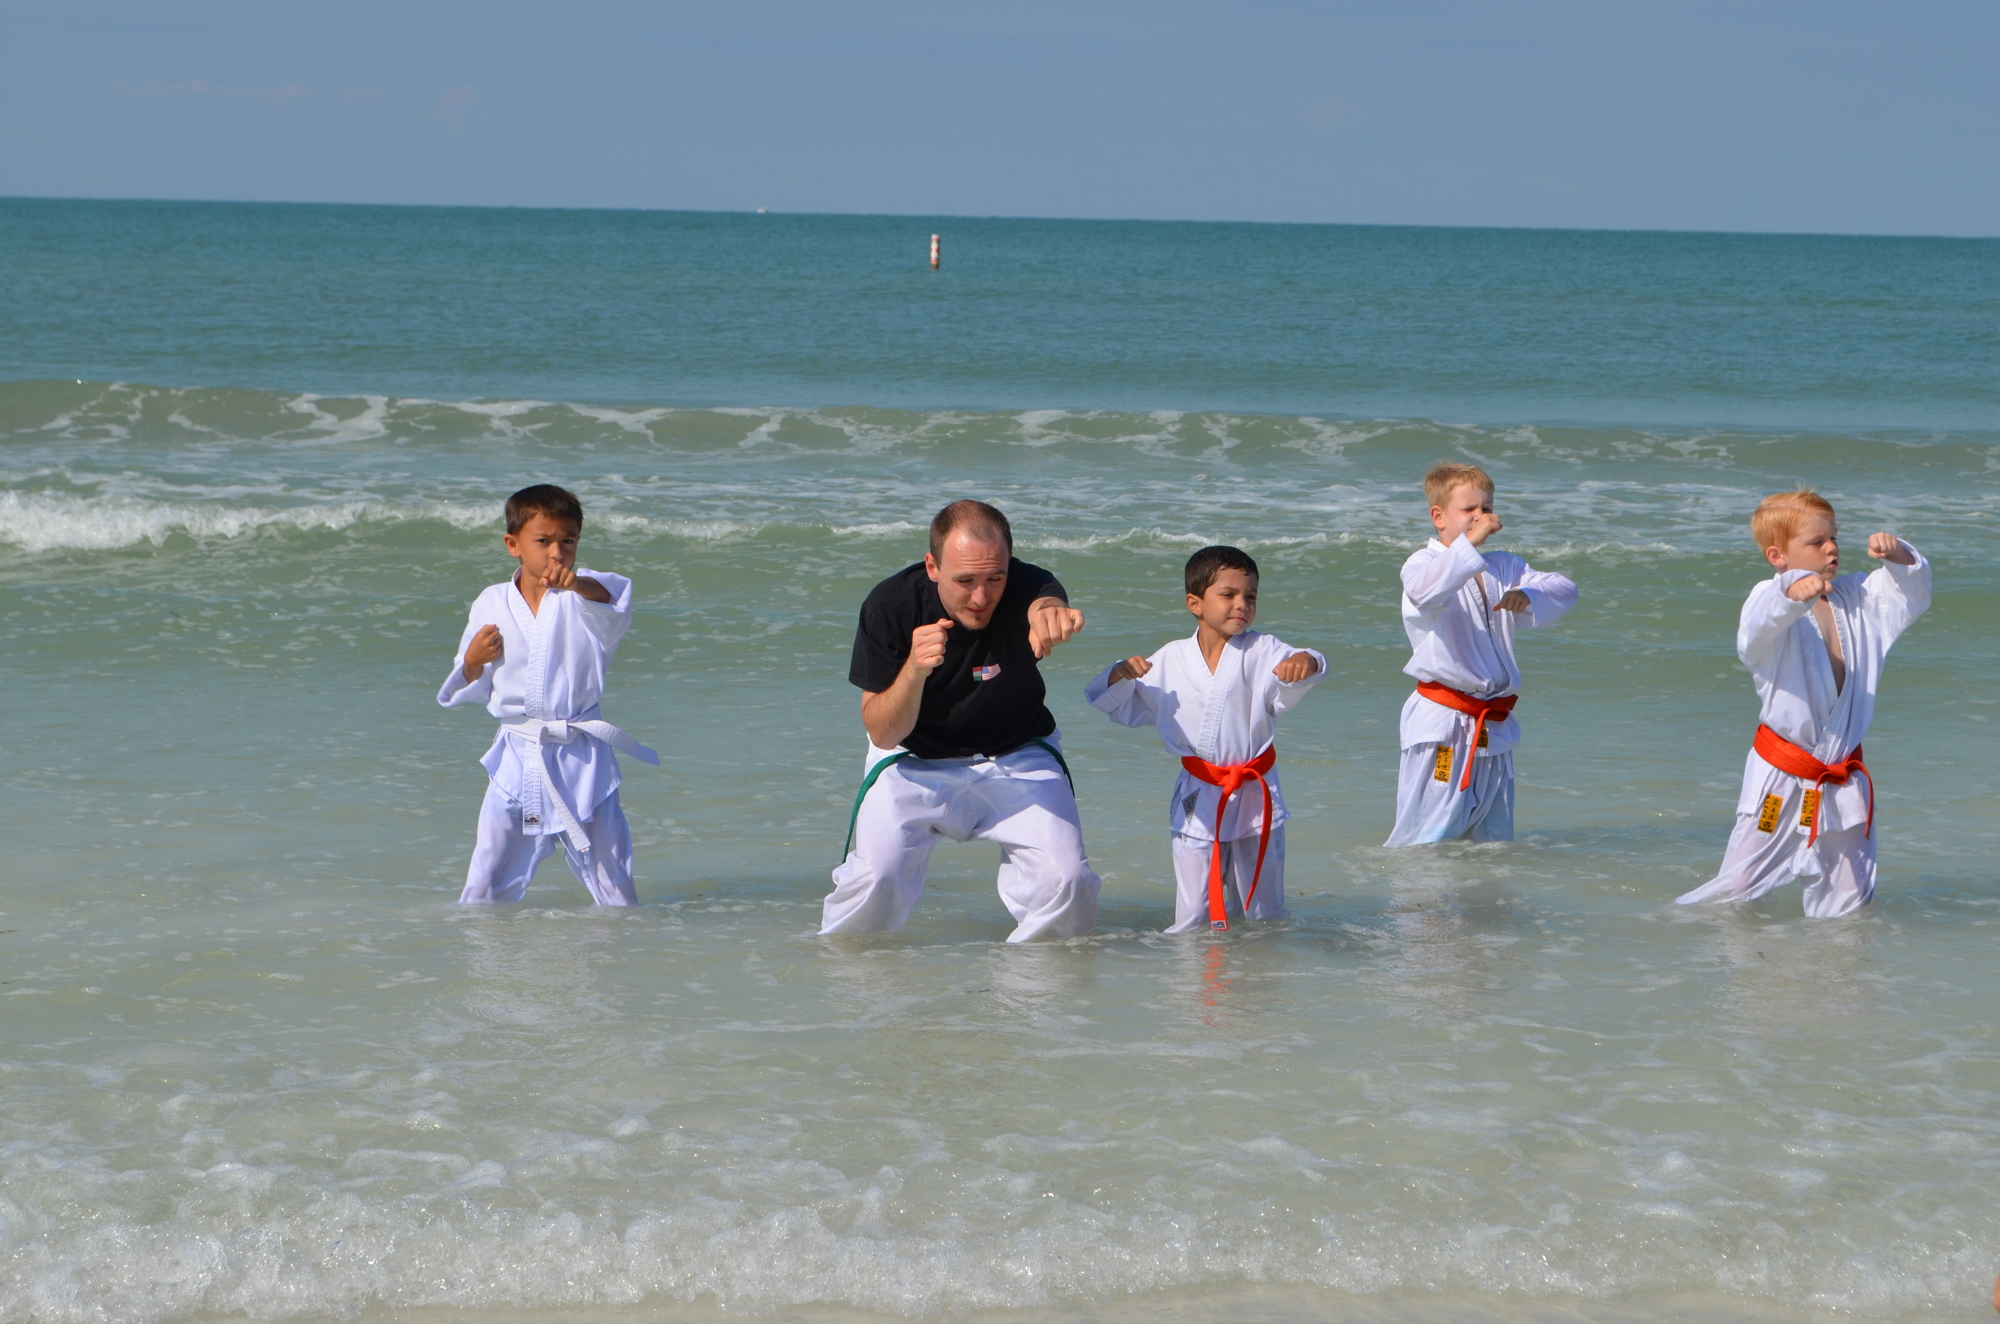 Students of the International martial Arts Academy practice in the waves Saturday morning.